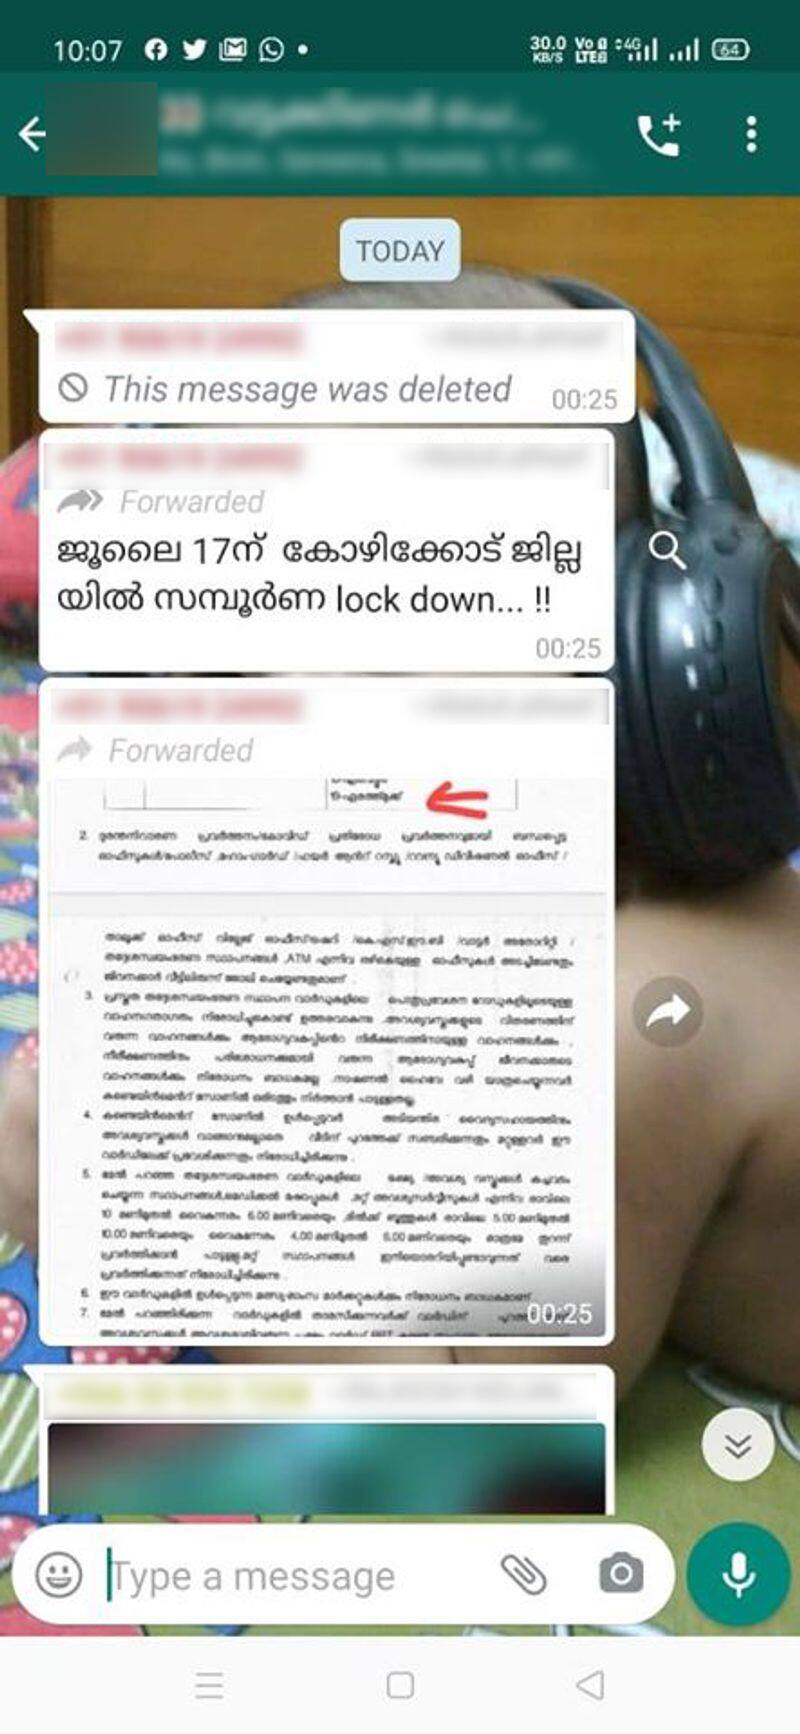 is it complete lockdown on July 17 at Kozhikode District